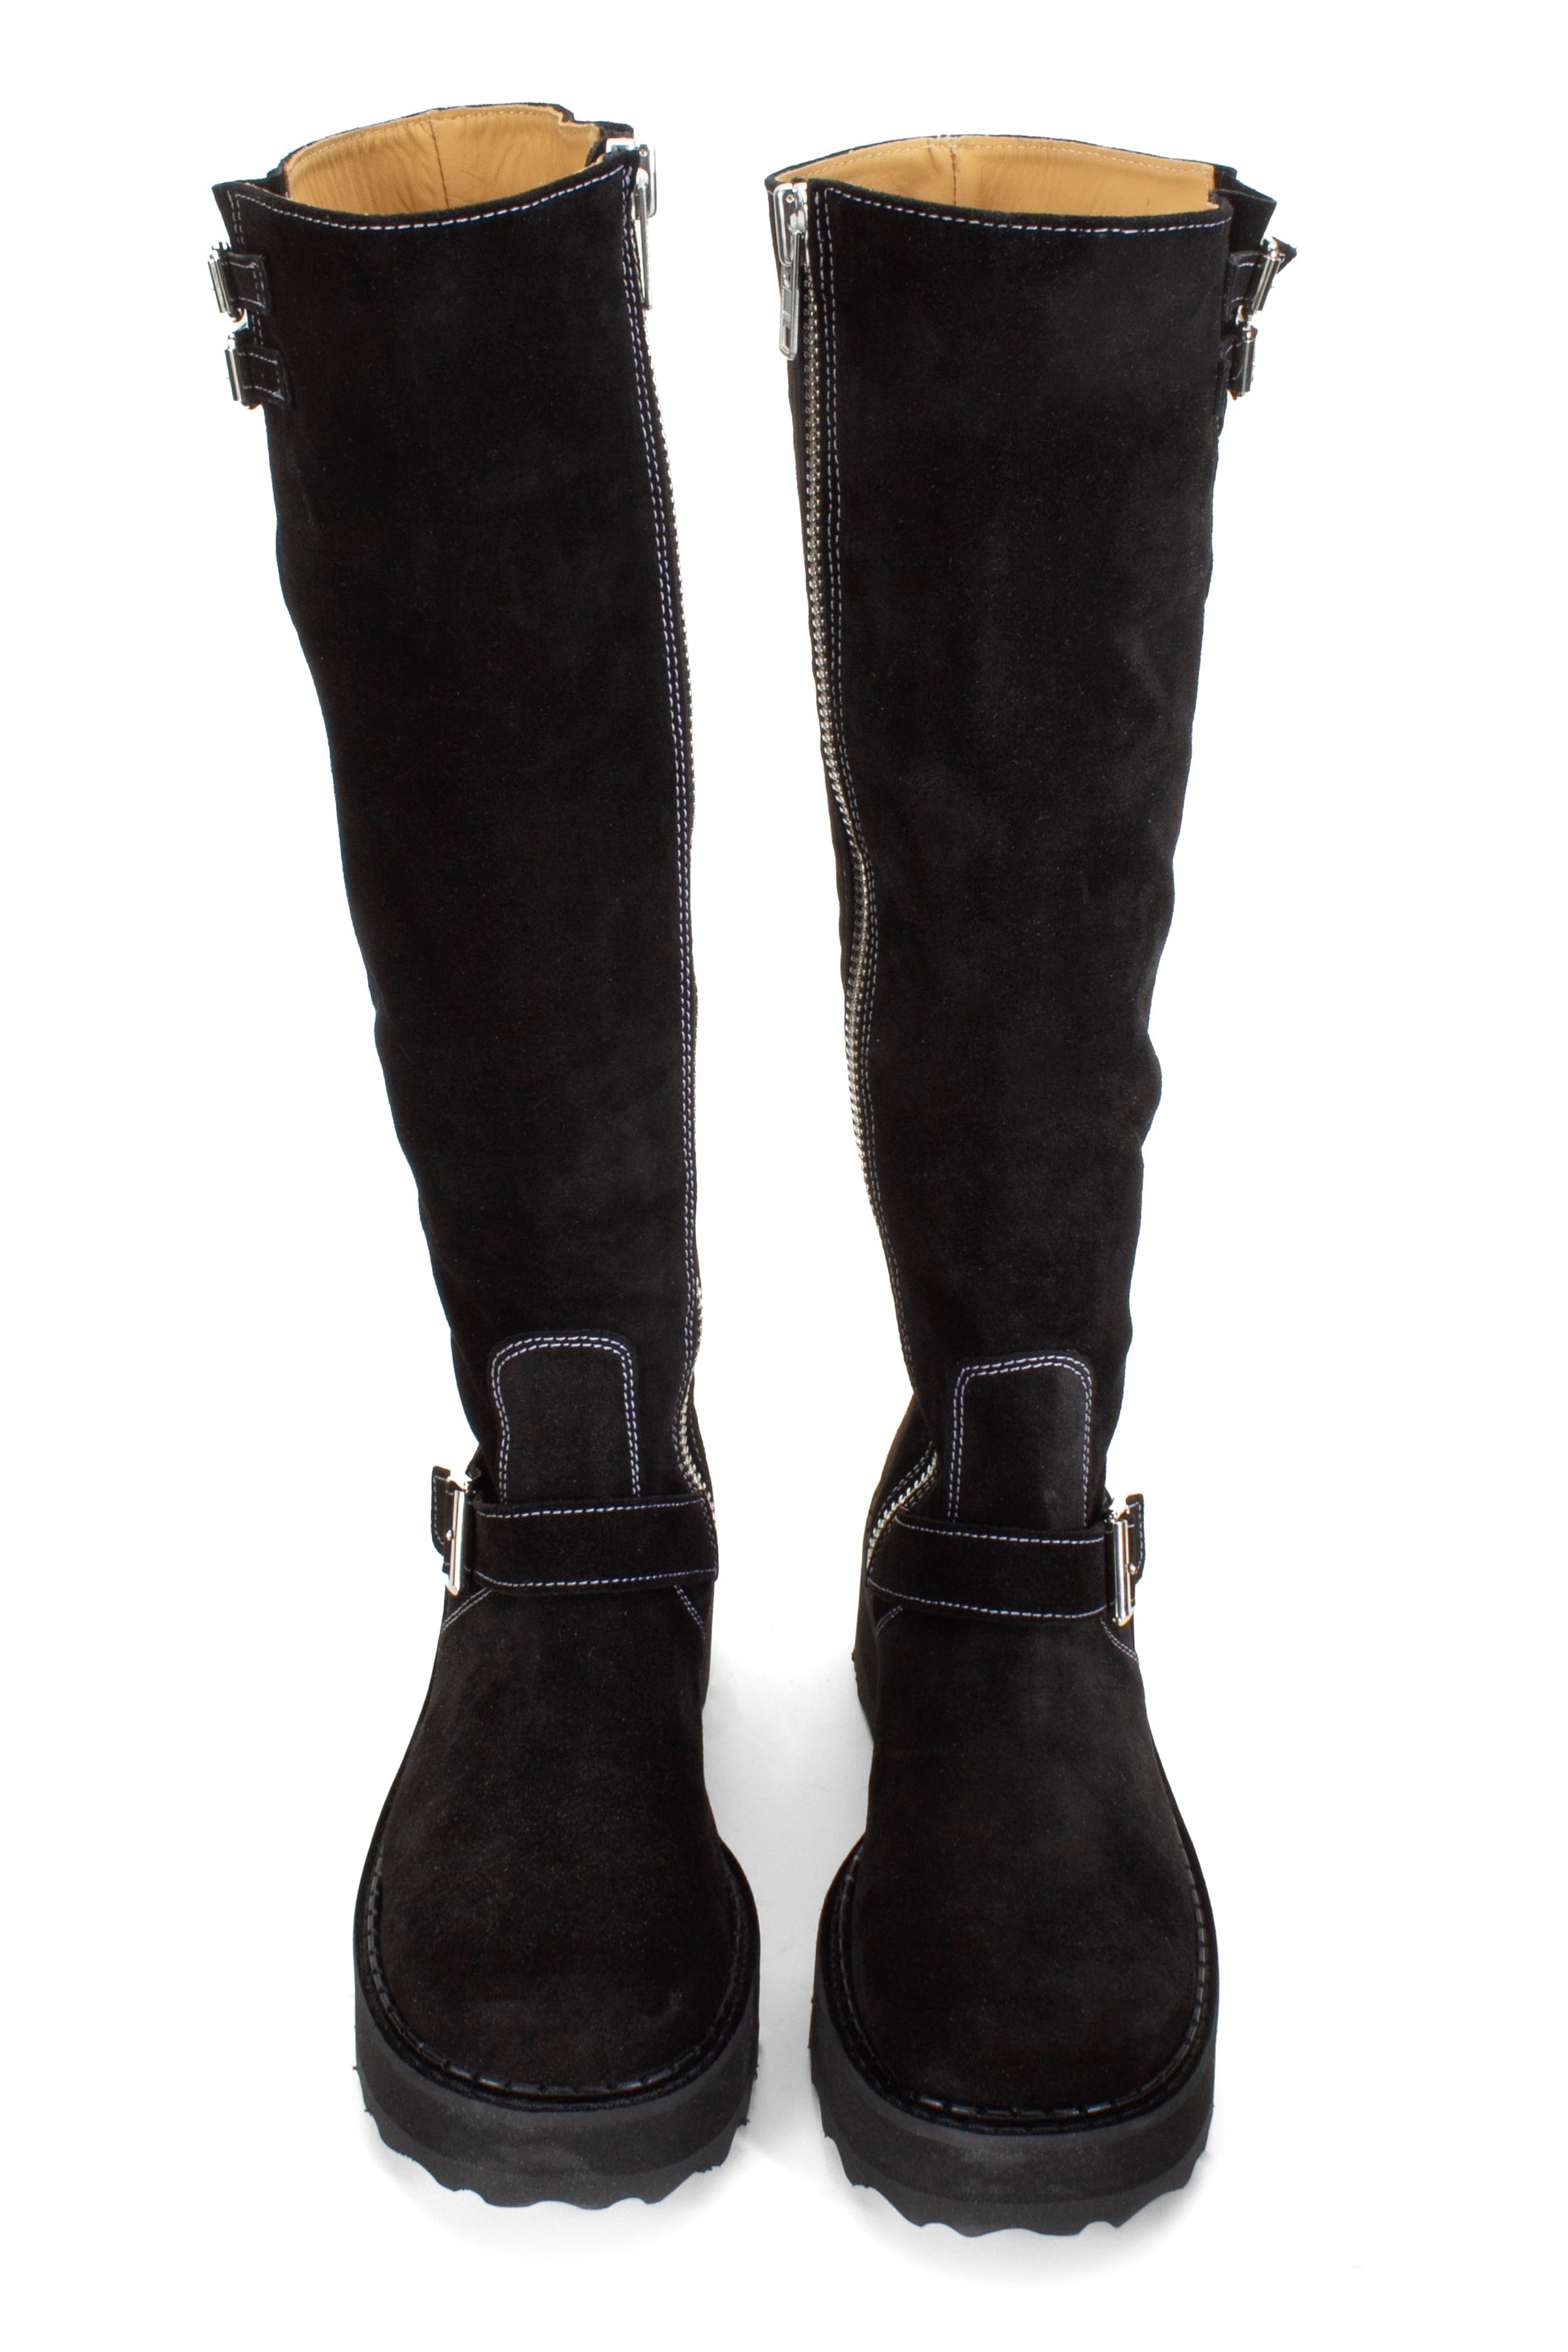 Boots in Black are an under-the-knee-high, silver buckles with white stiches